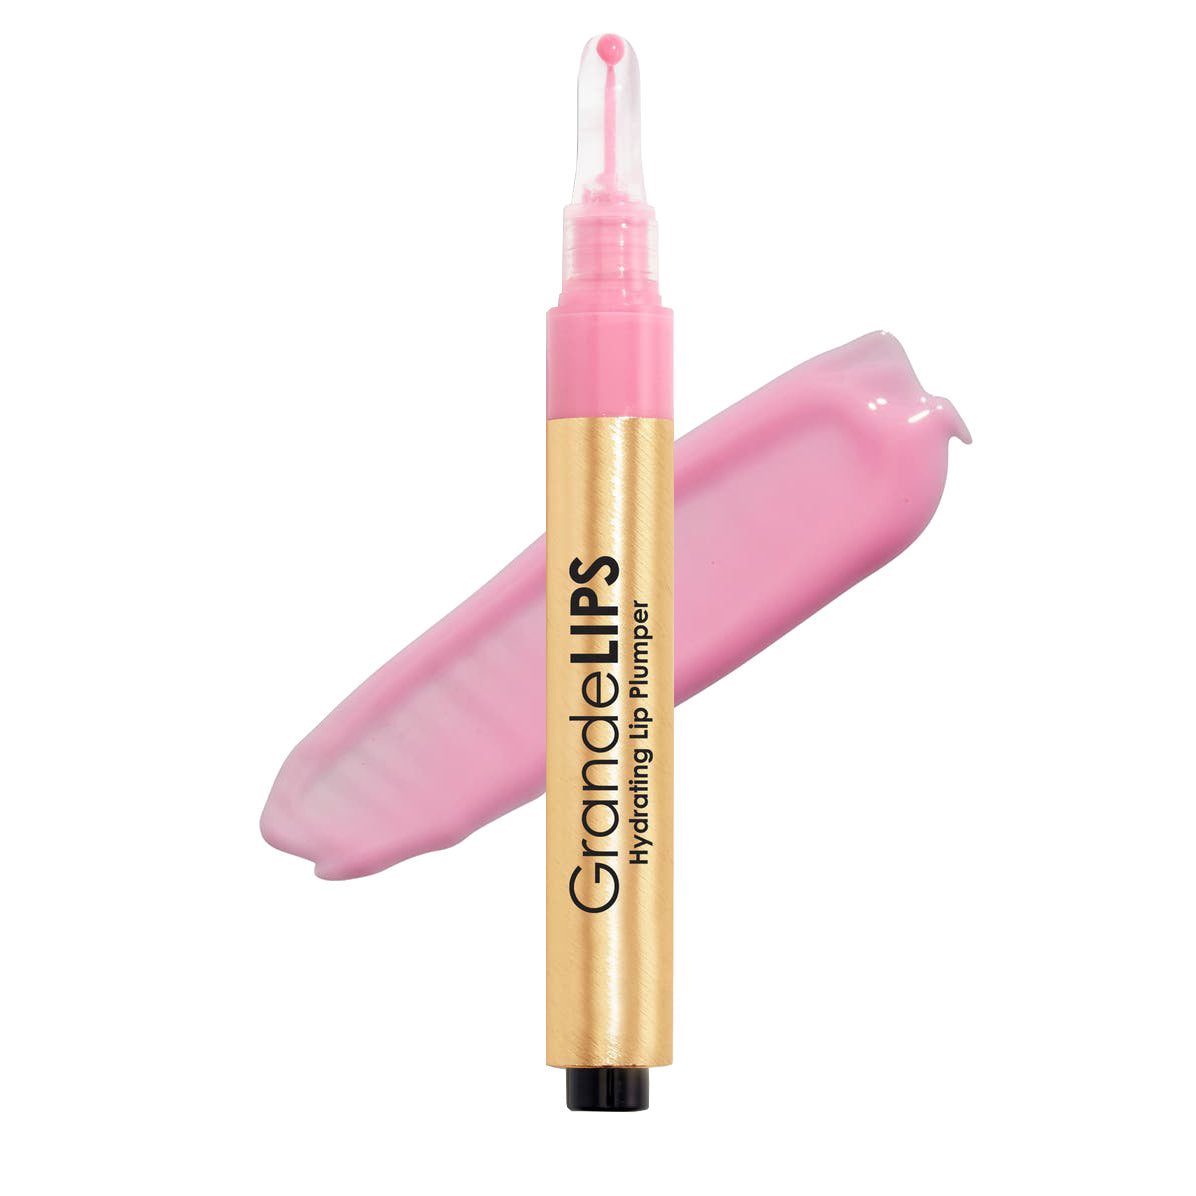 GrandeLips Hydrating Lip Plumper Gloss - Pale Pink with Swatch